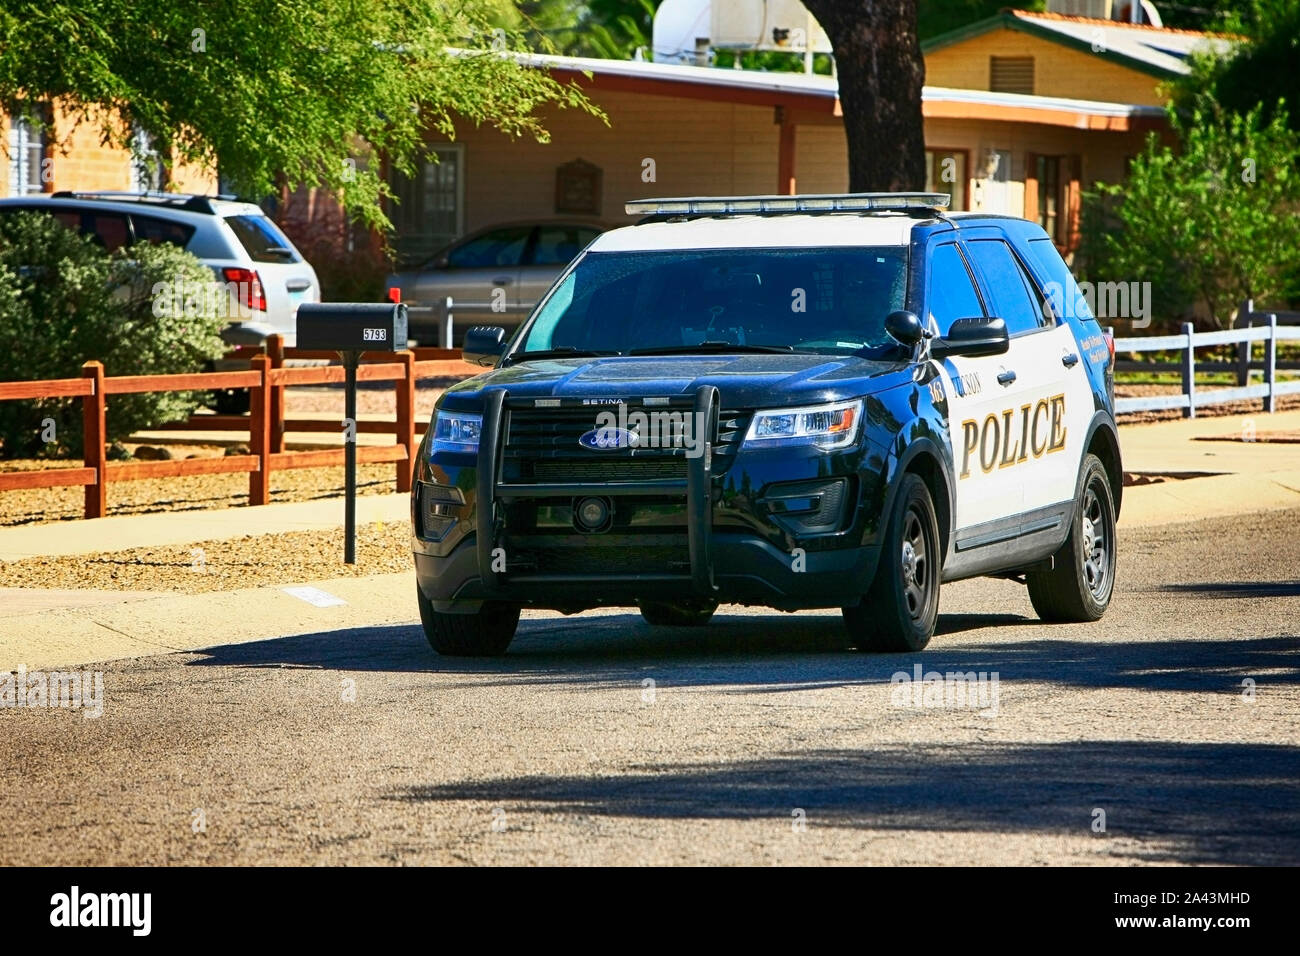 Tucson Police Department cruiser in a housing suburb of this Arizona city Stock Photo